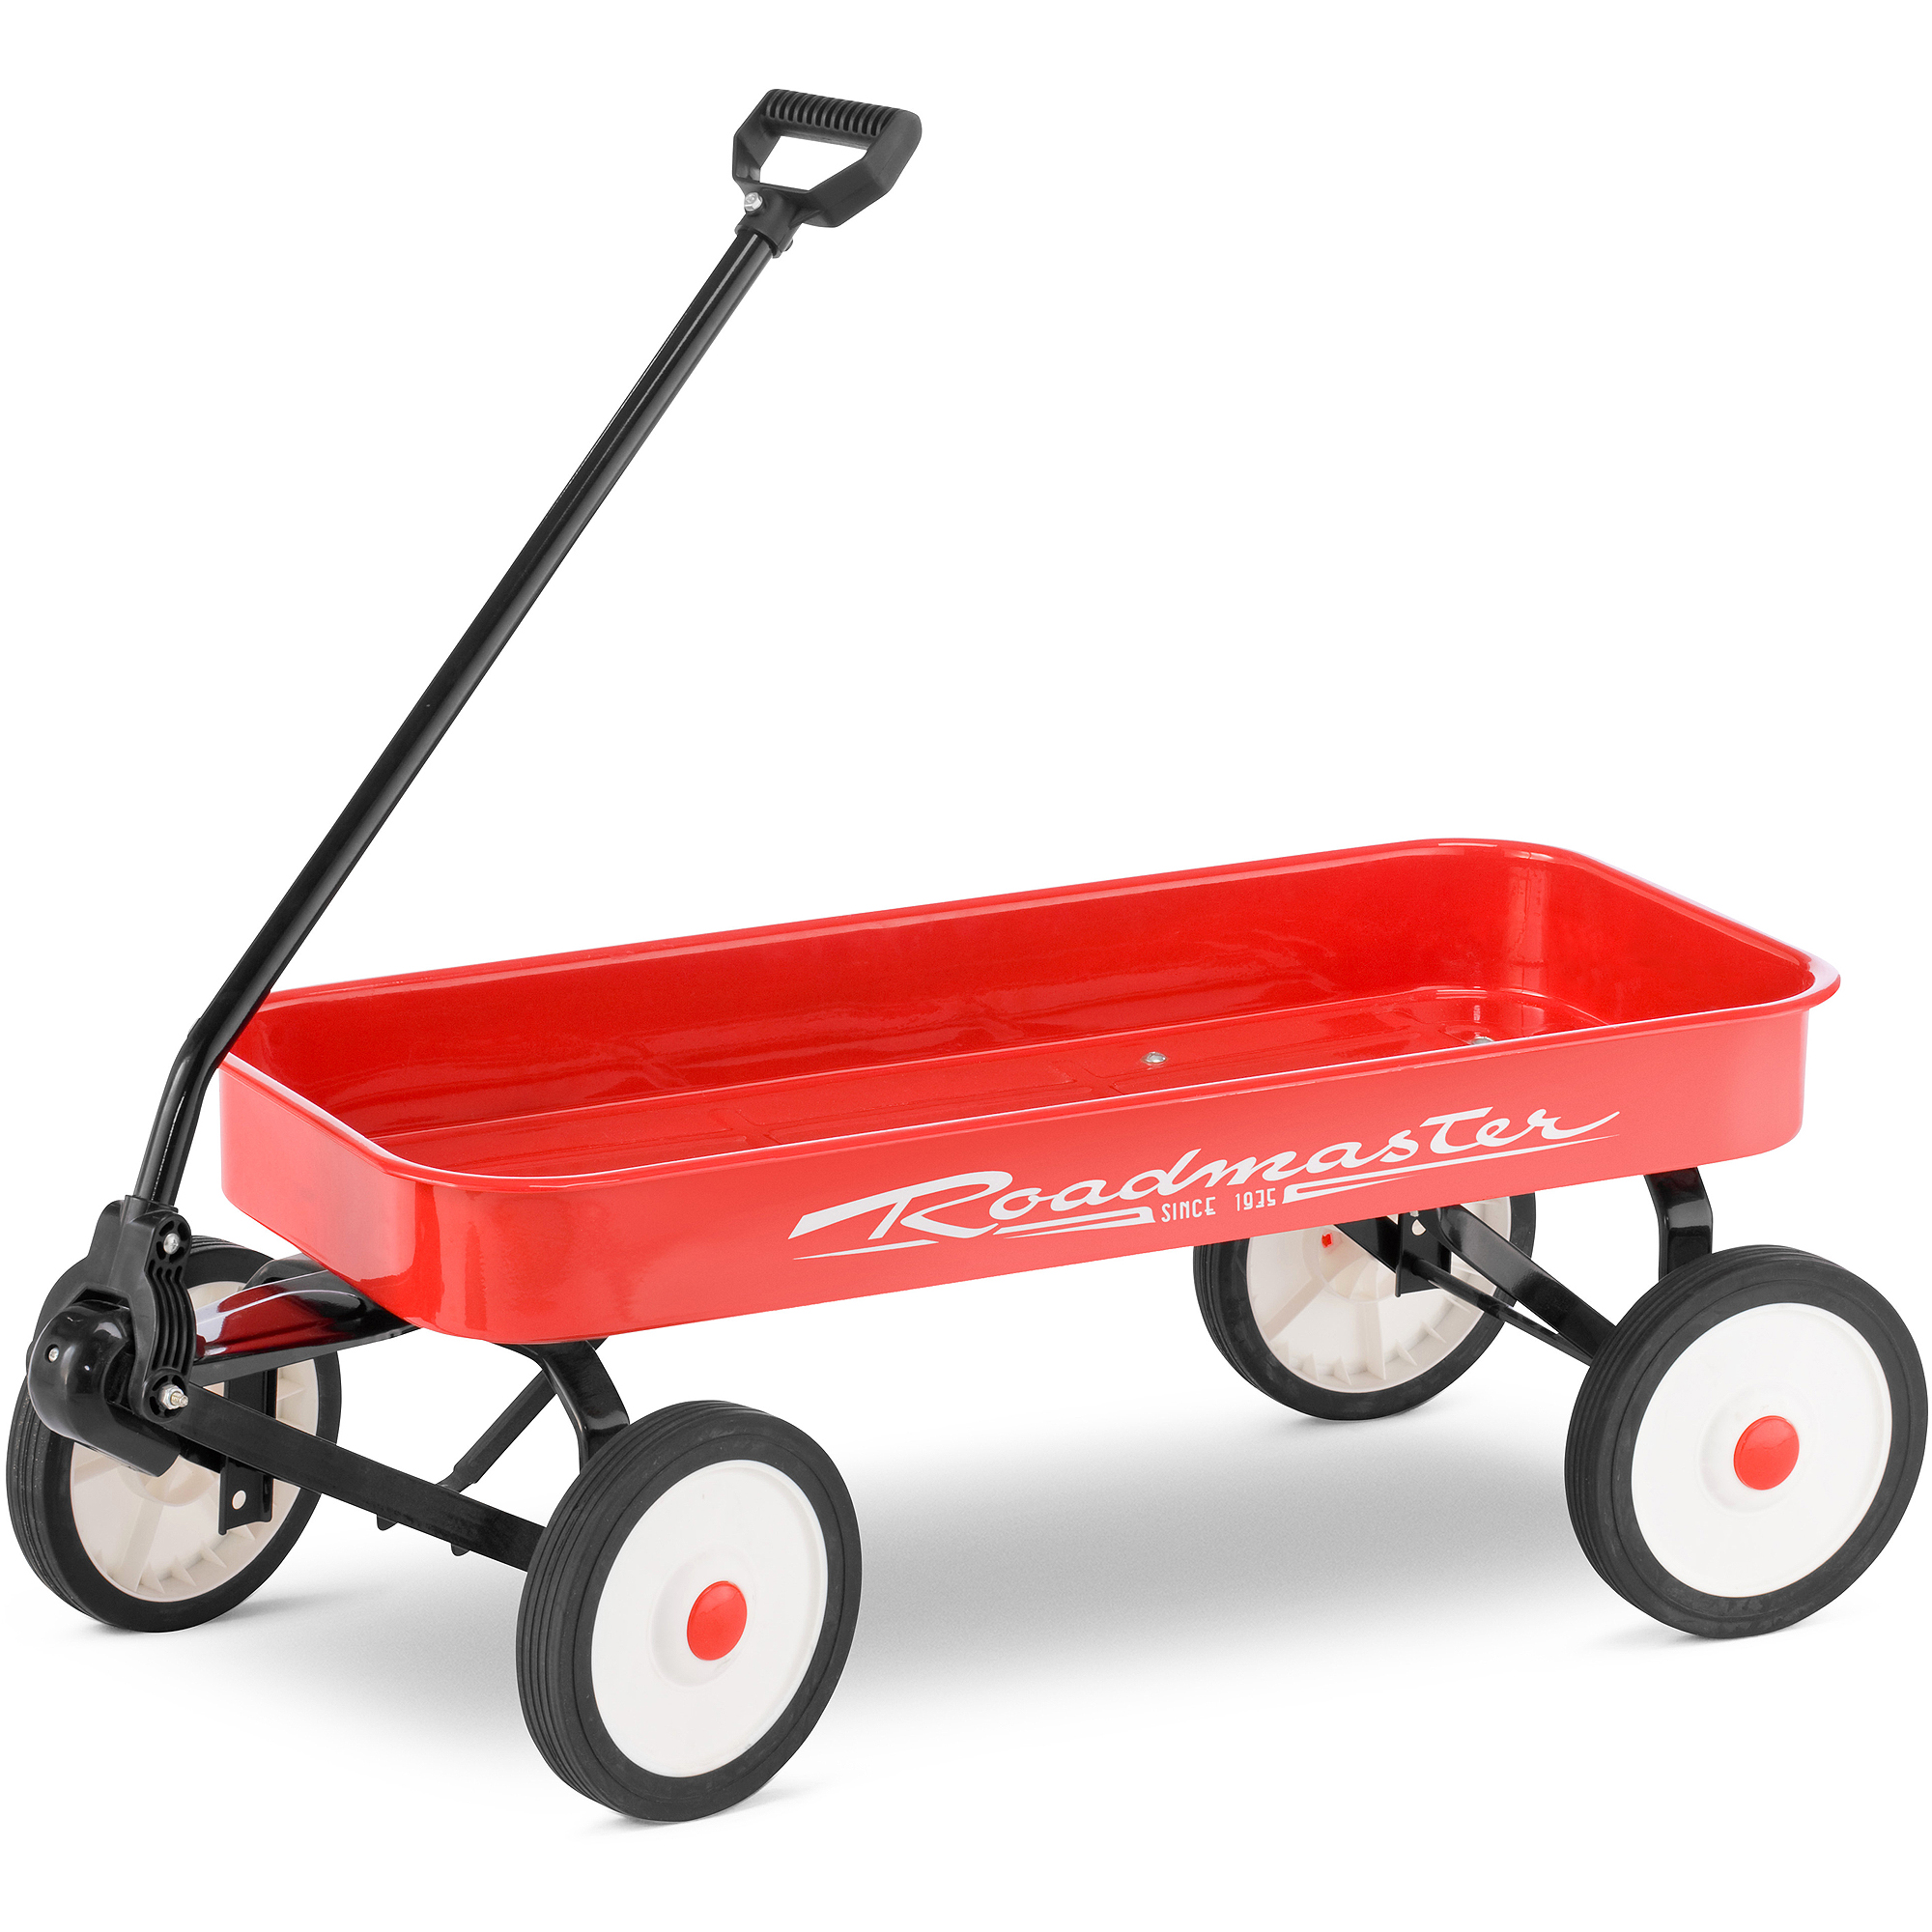 Roadmaster 34" Steel Wagon, Red - image 1 of 3